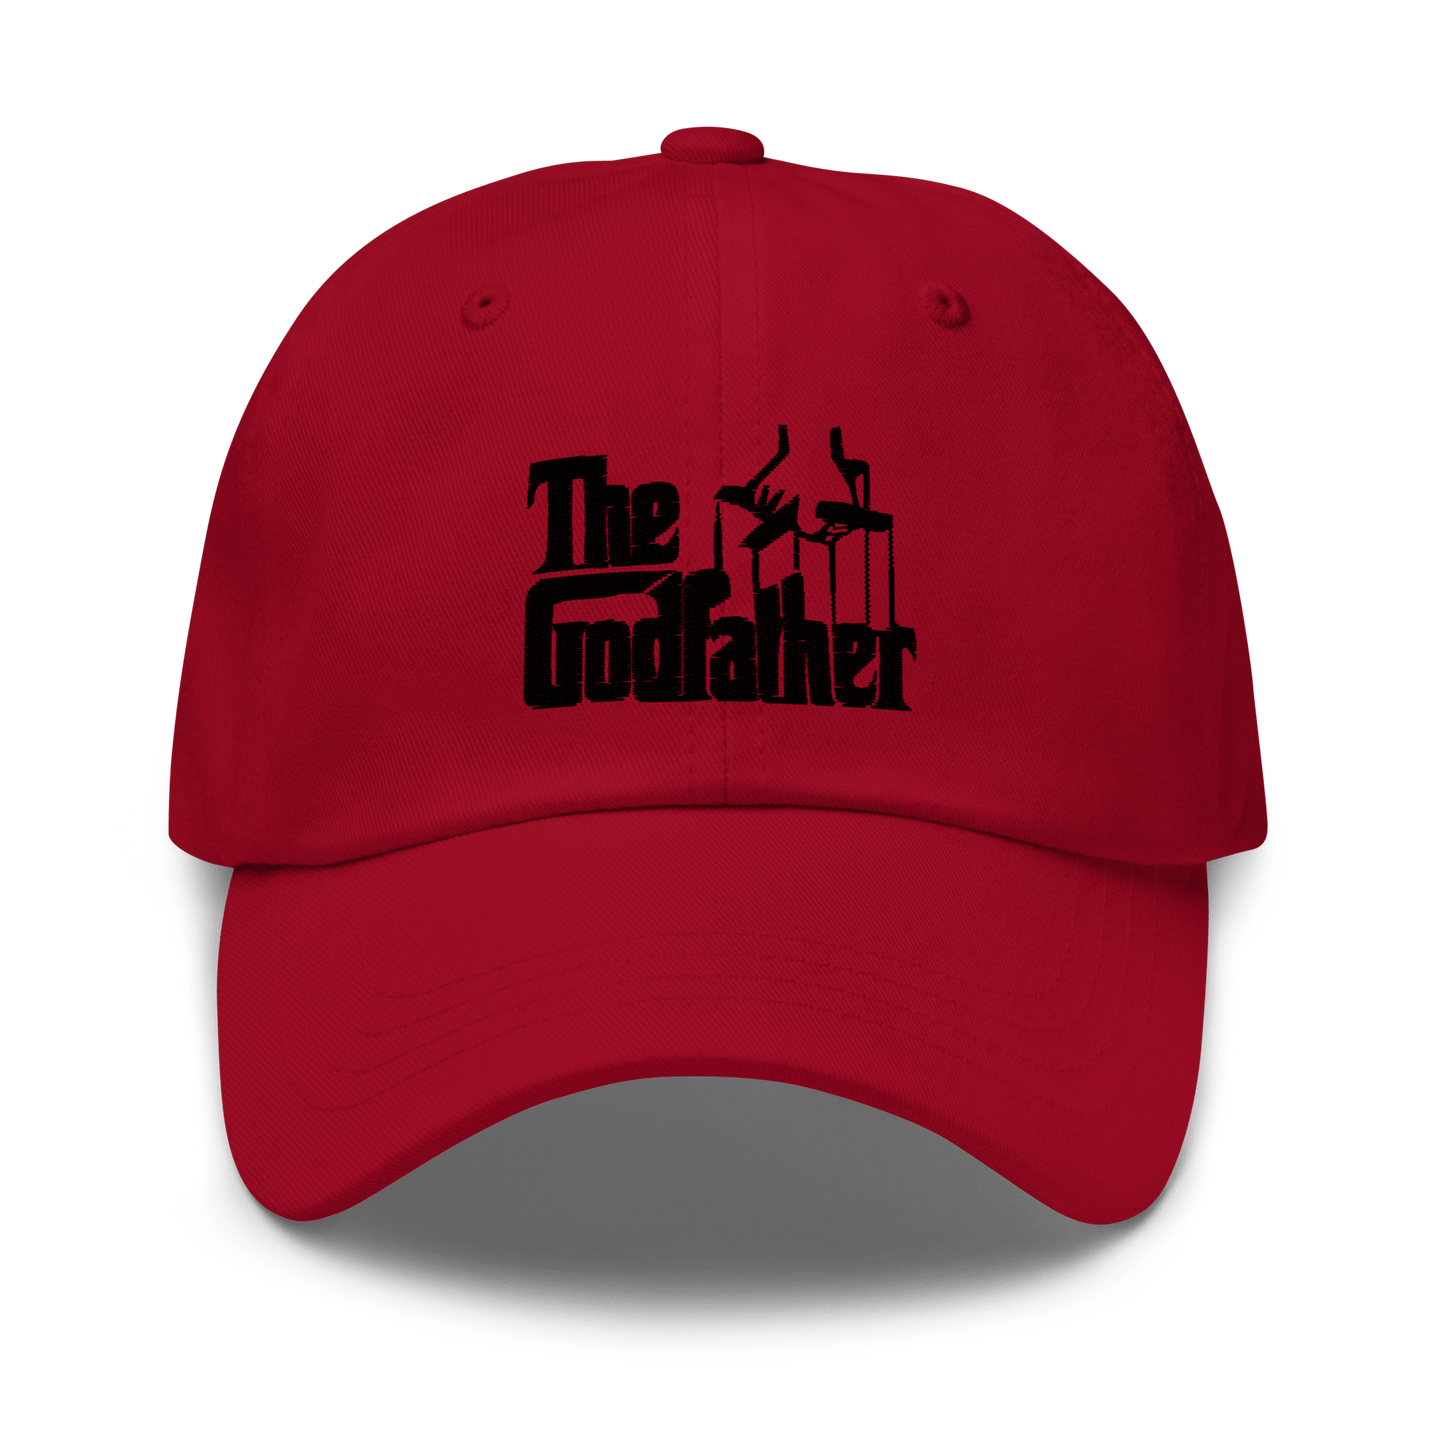 The Godfather Logo Classic Dad Hat - Paramount Shop